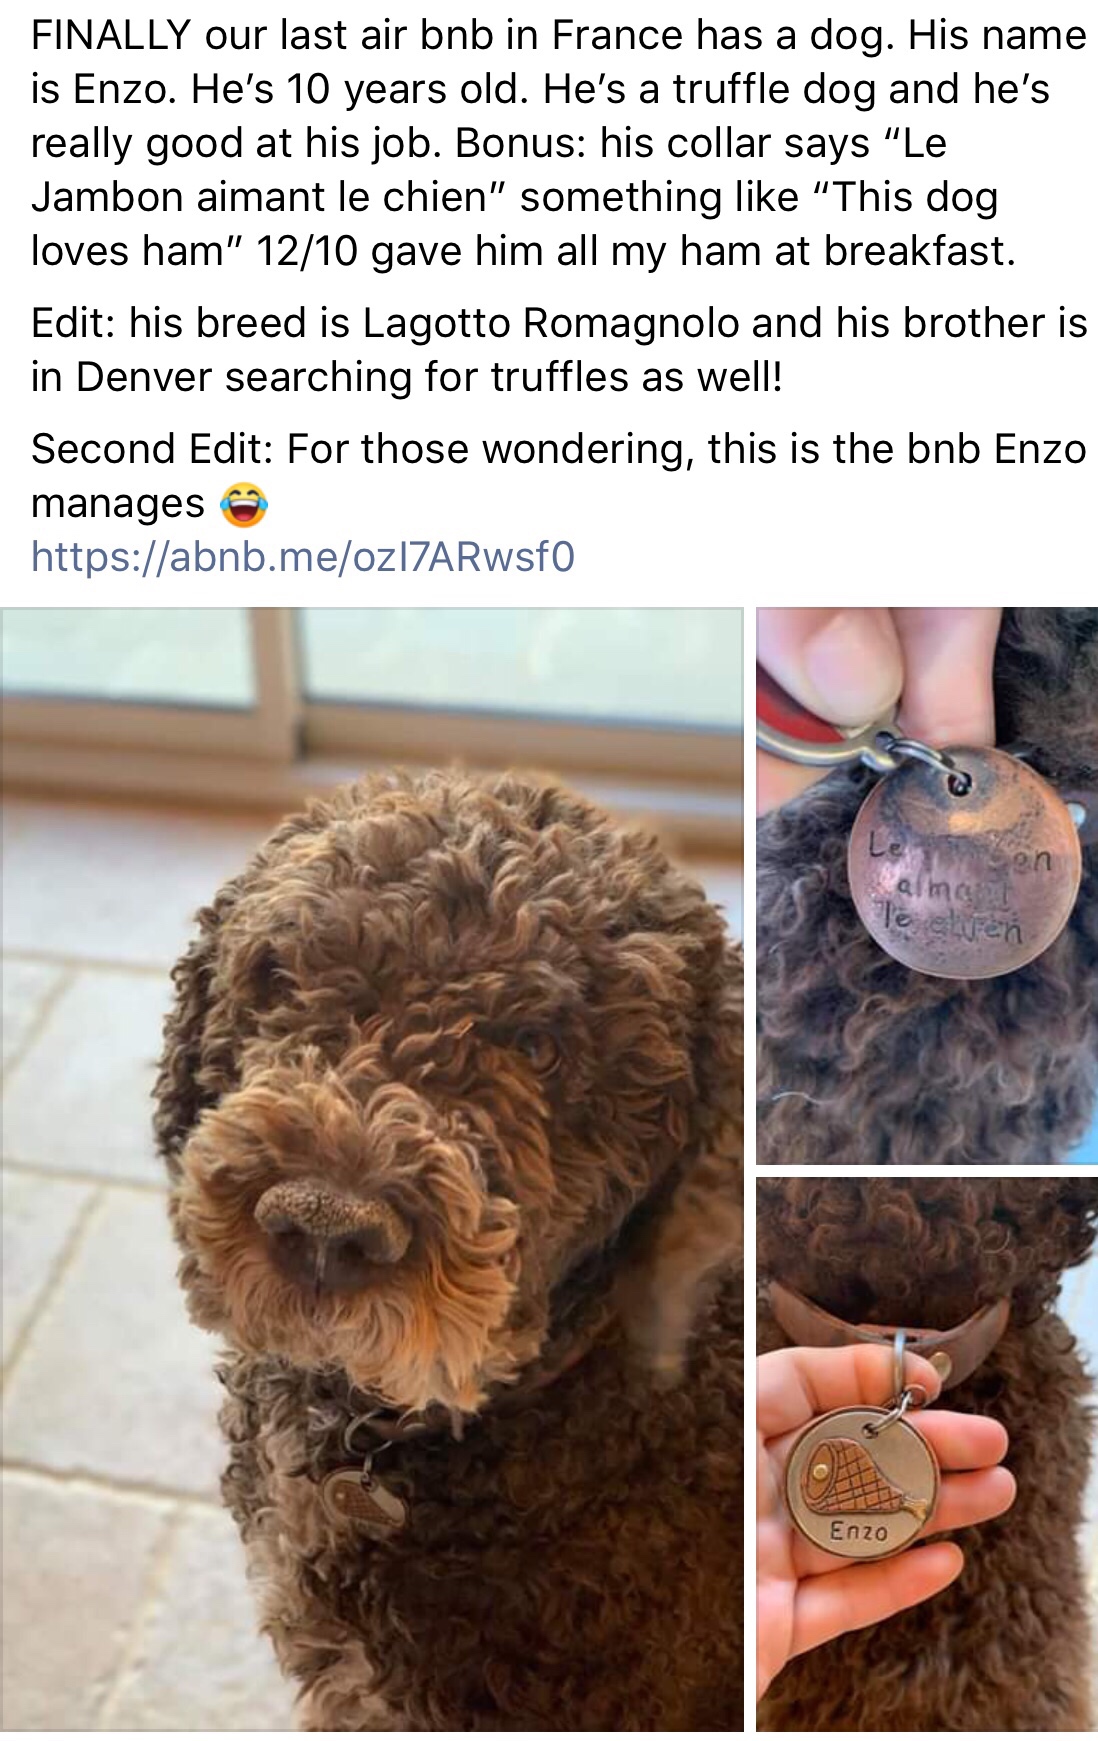 meme spanish water dog - Finally our last air bnb in France has a dog. His name is Enzo. He's 10 years old. He's a truffle dog and he's really good at his job. Bonus his collar says "Le Jambon aimant le chien" something "This dog loves ham" 1210 gave him 